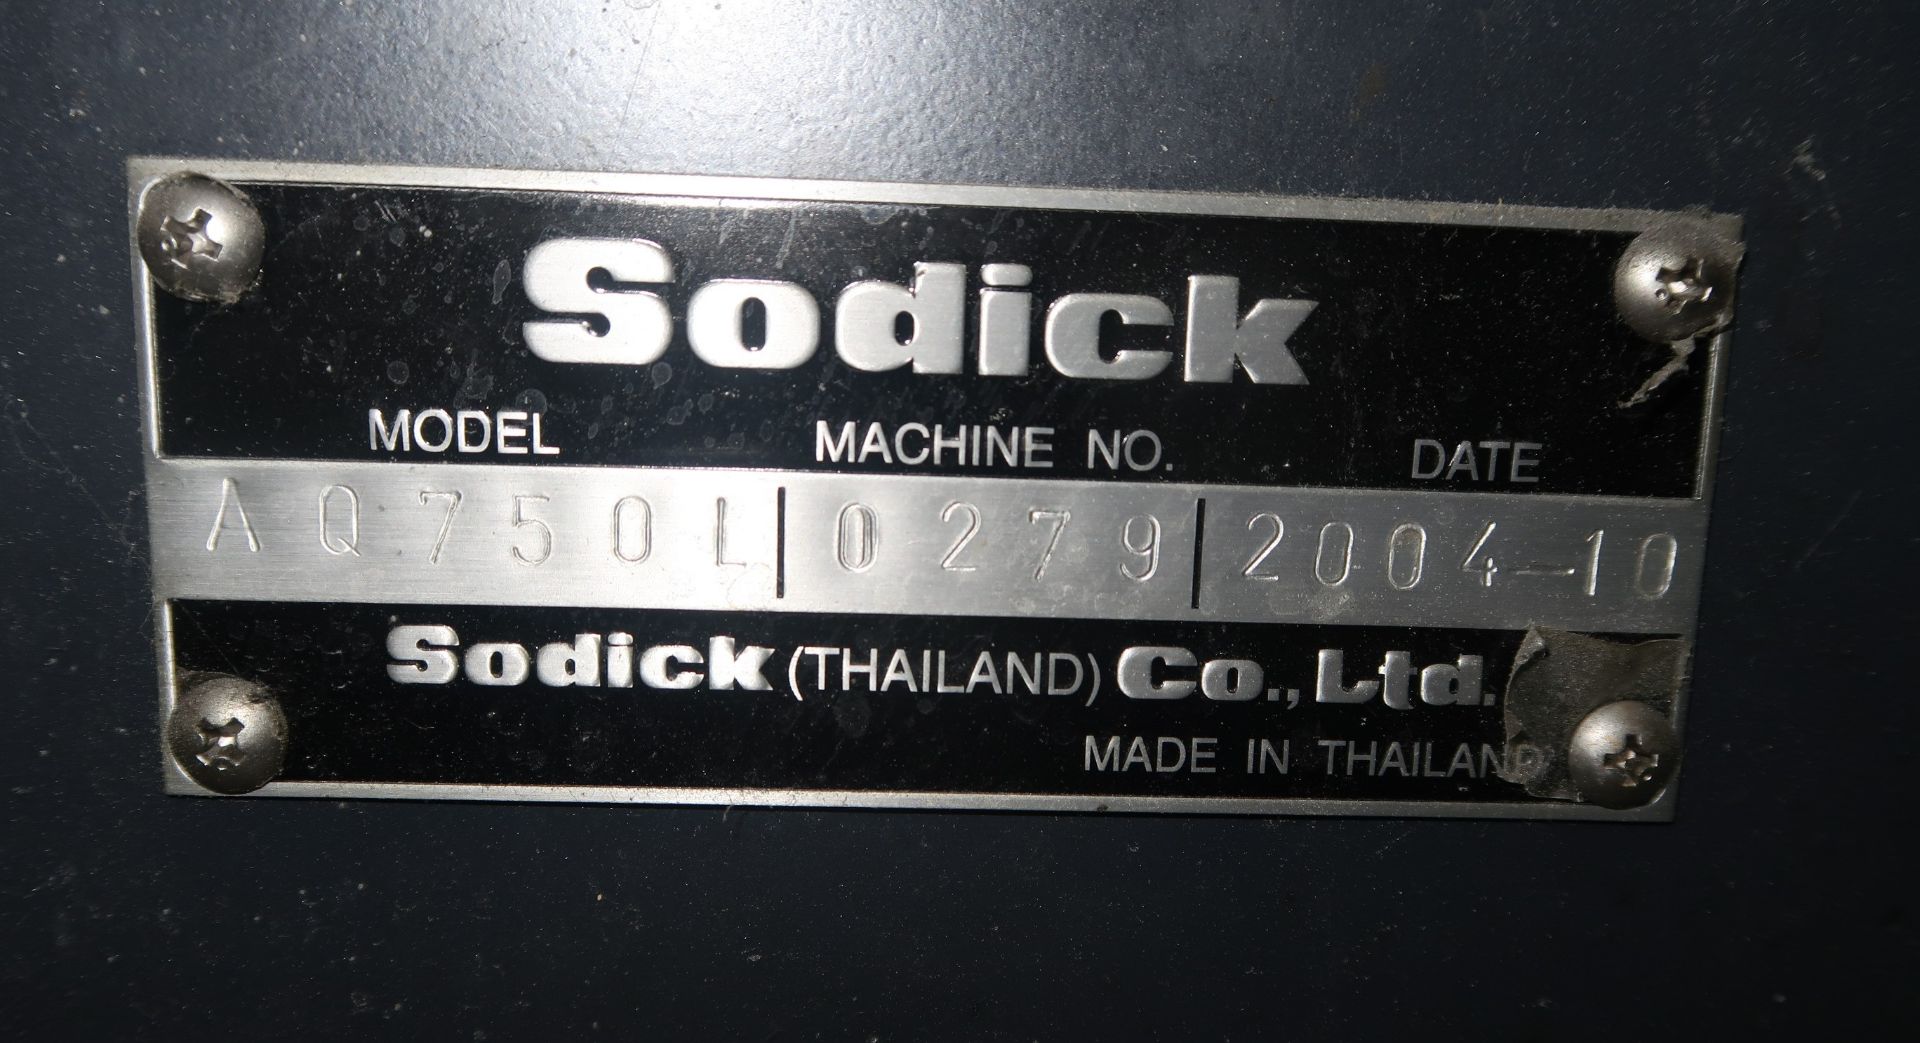 Sodick AW750L 4-Axis CNC wire Cut EDM, New 2005 - Image 10 of 12